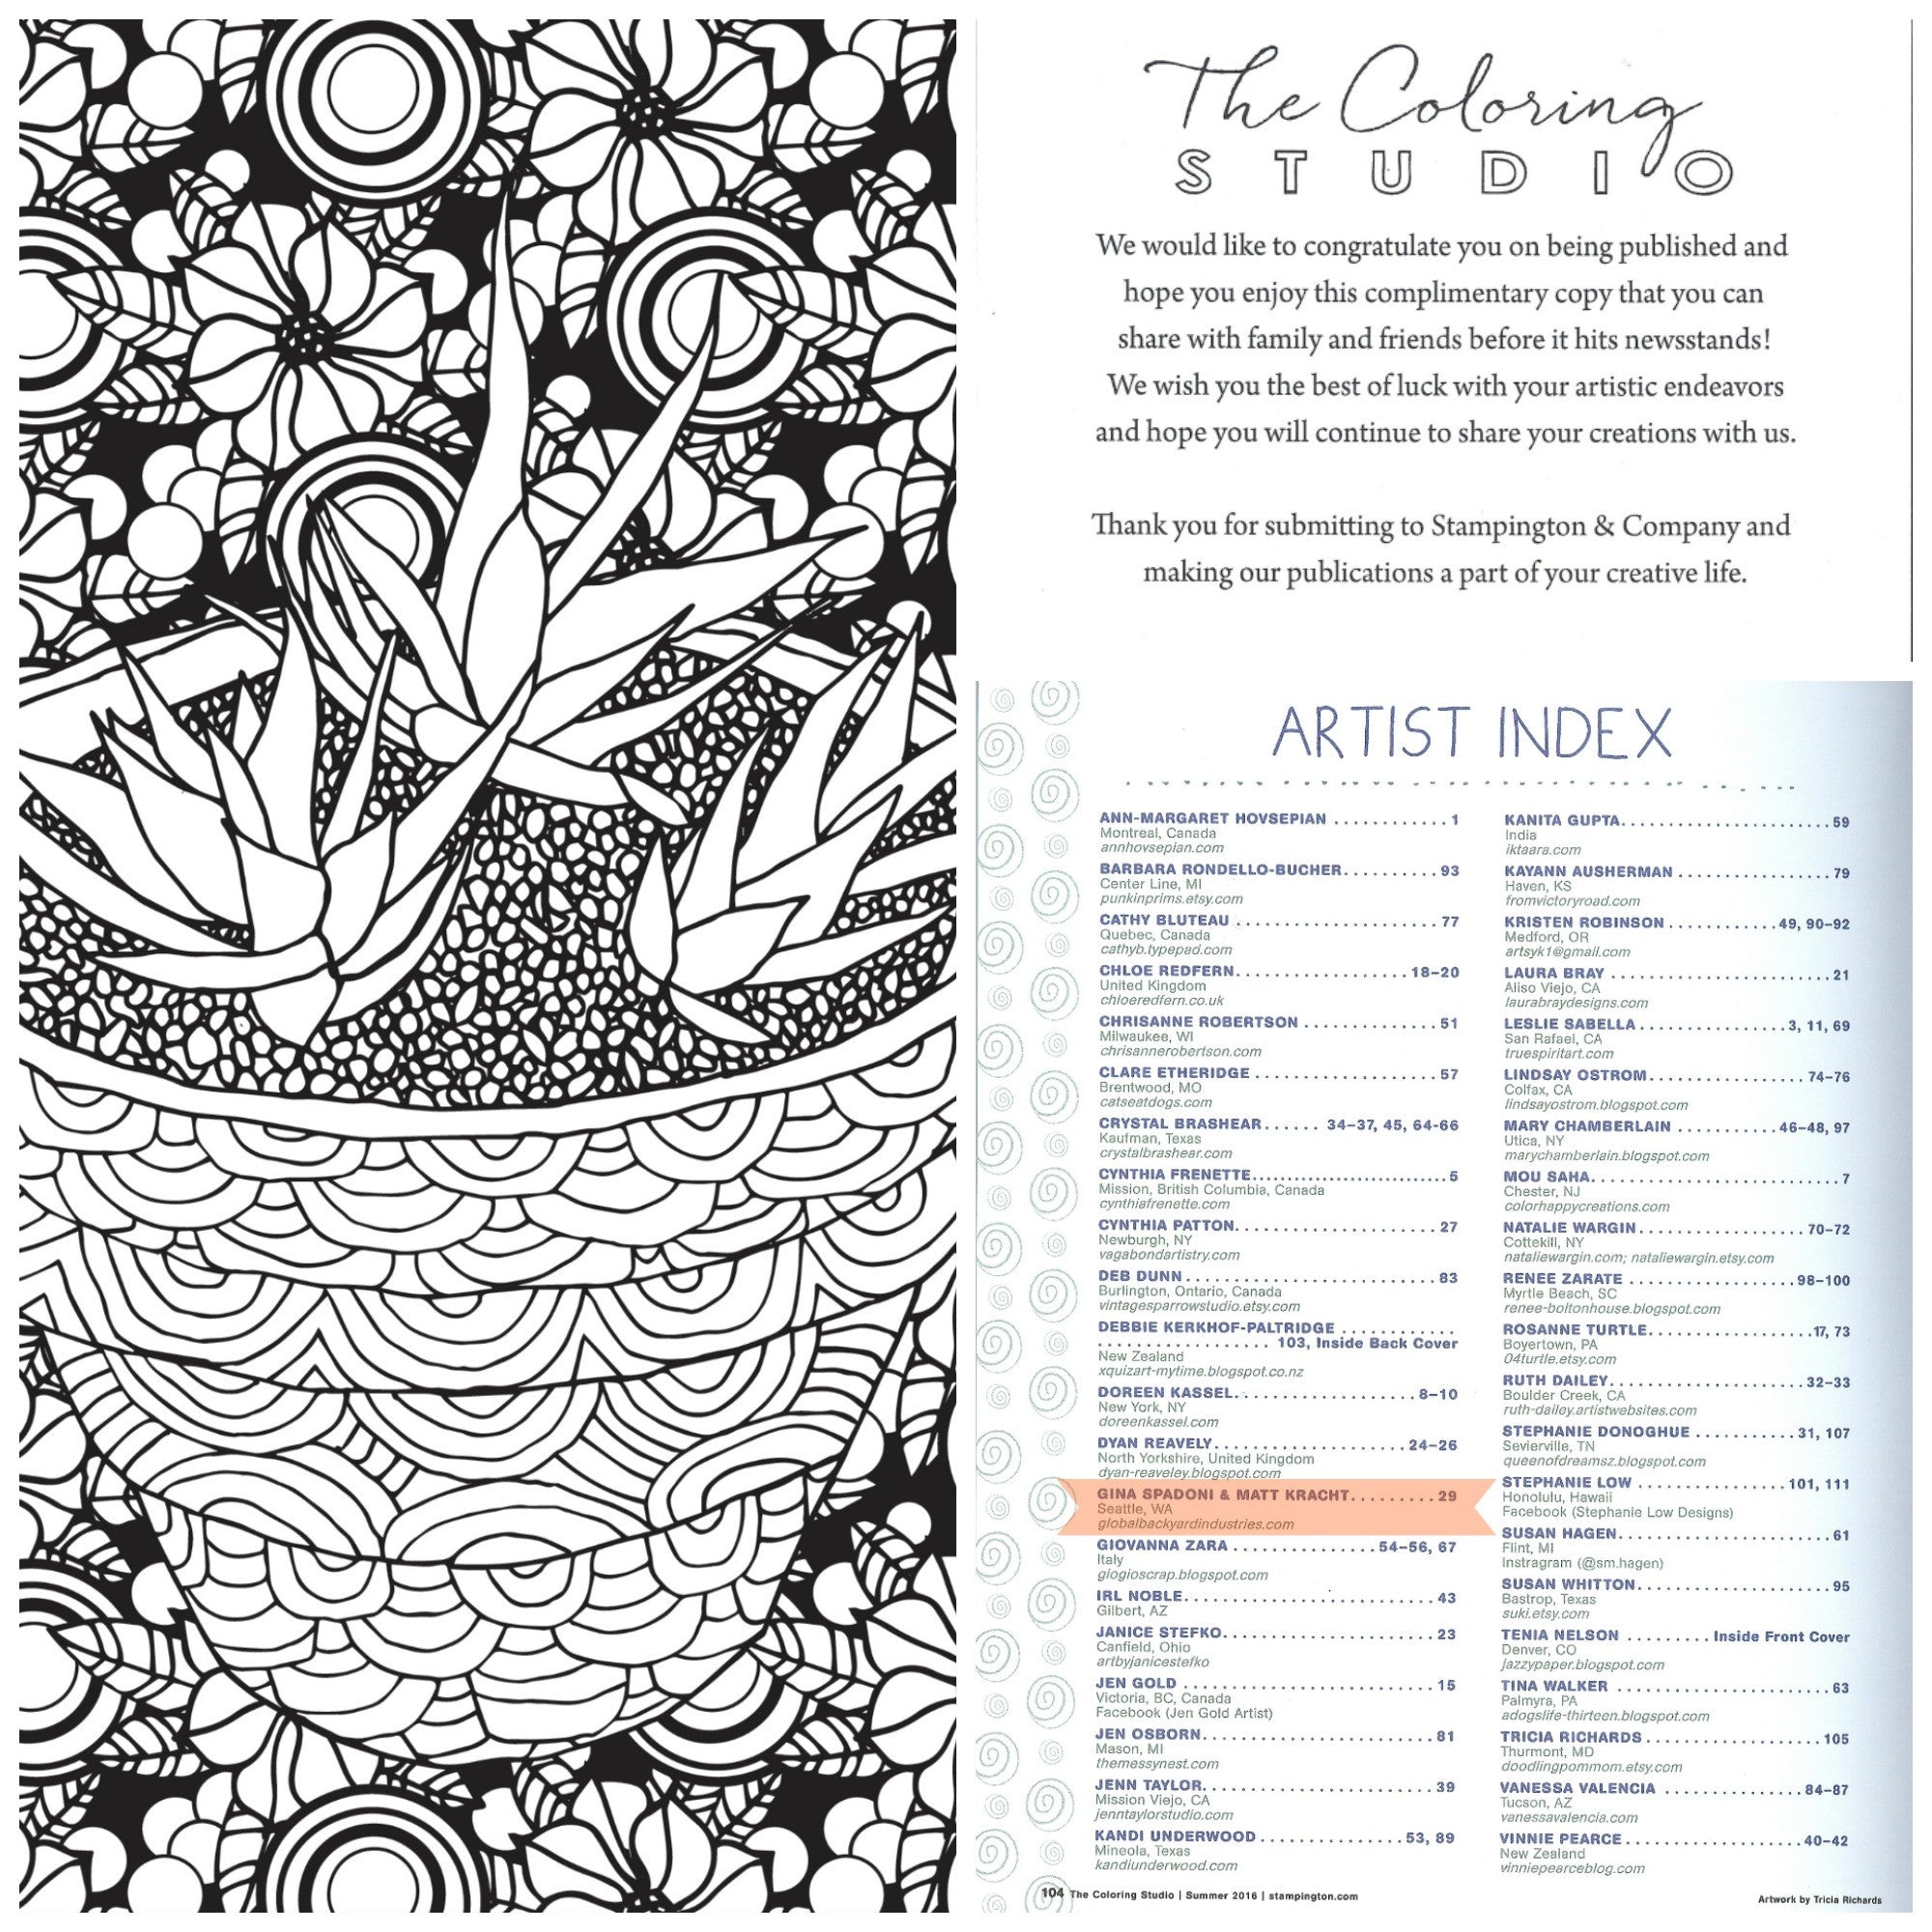 Succulent Serenity artwork featured in Stampington's "The Coloring Studio"